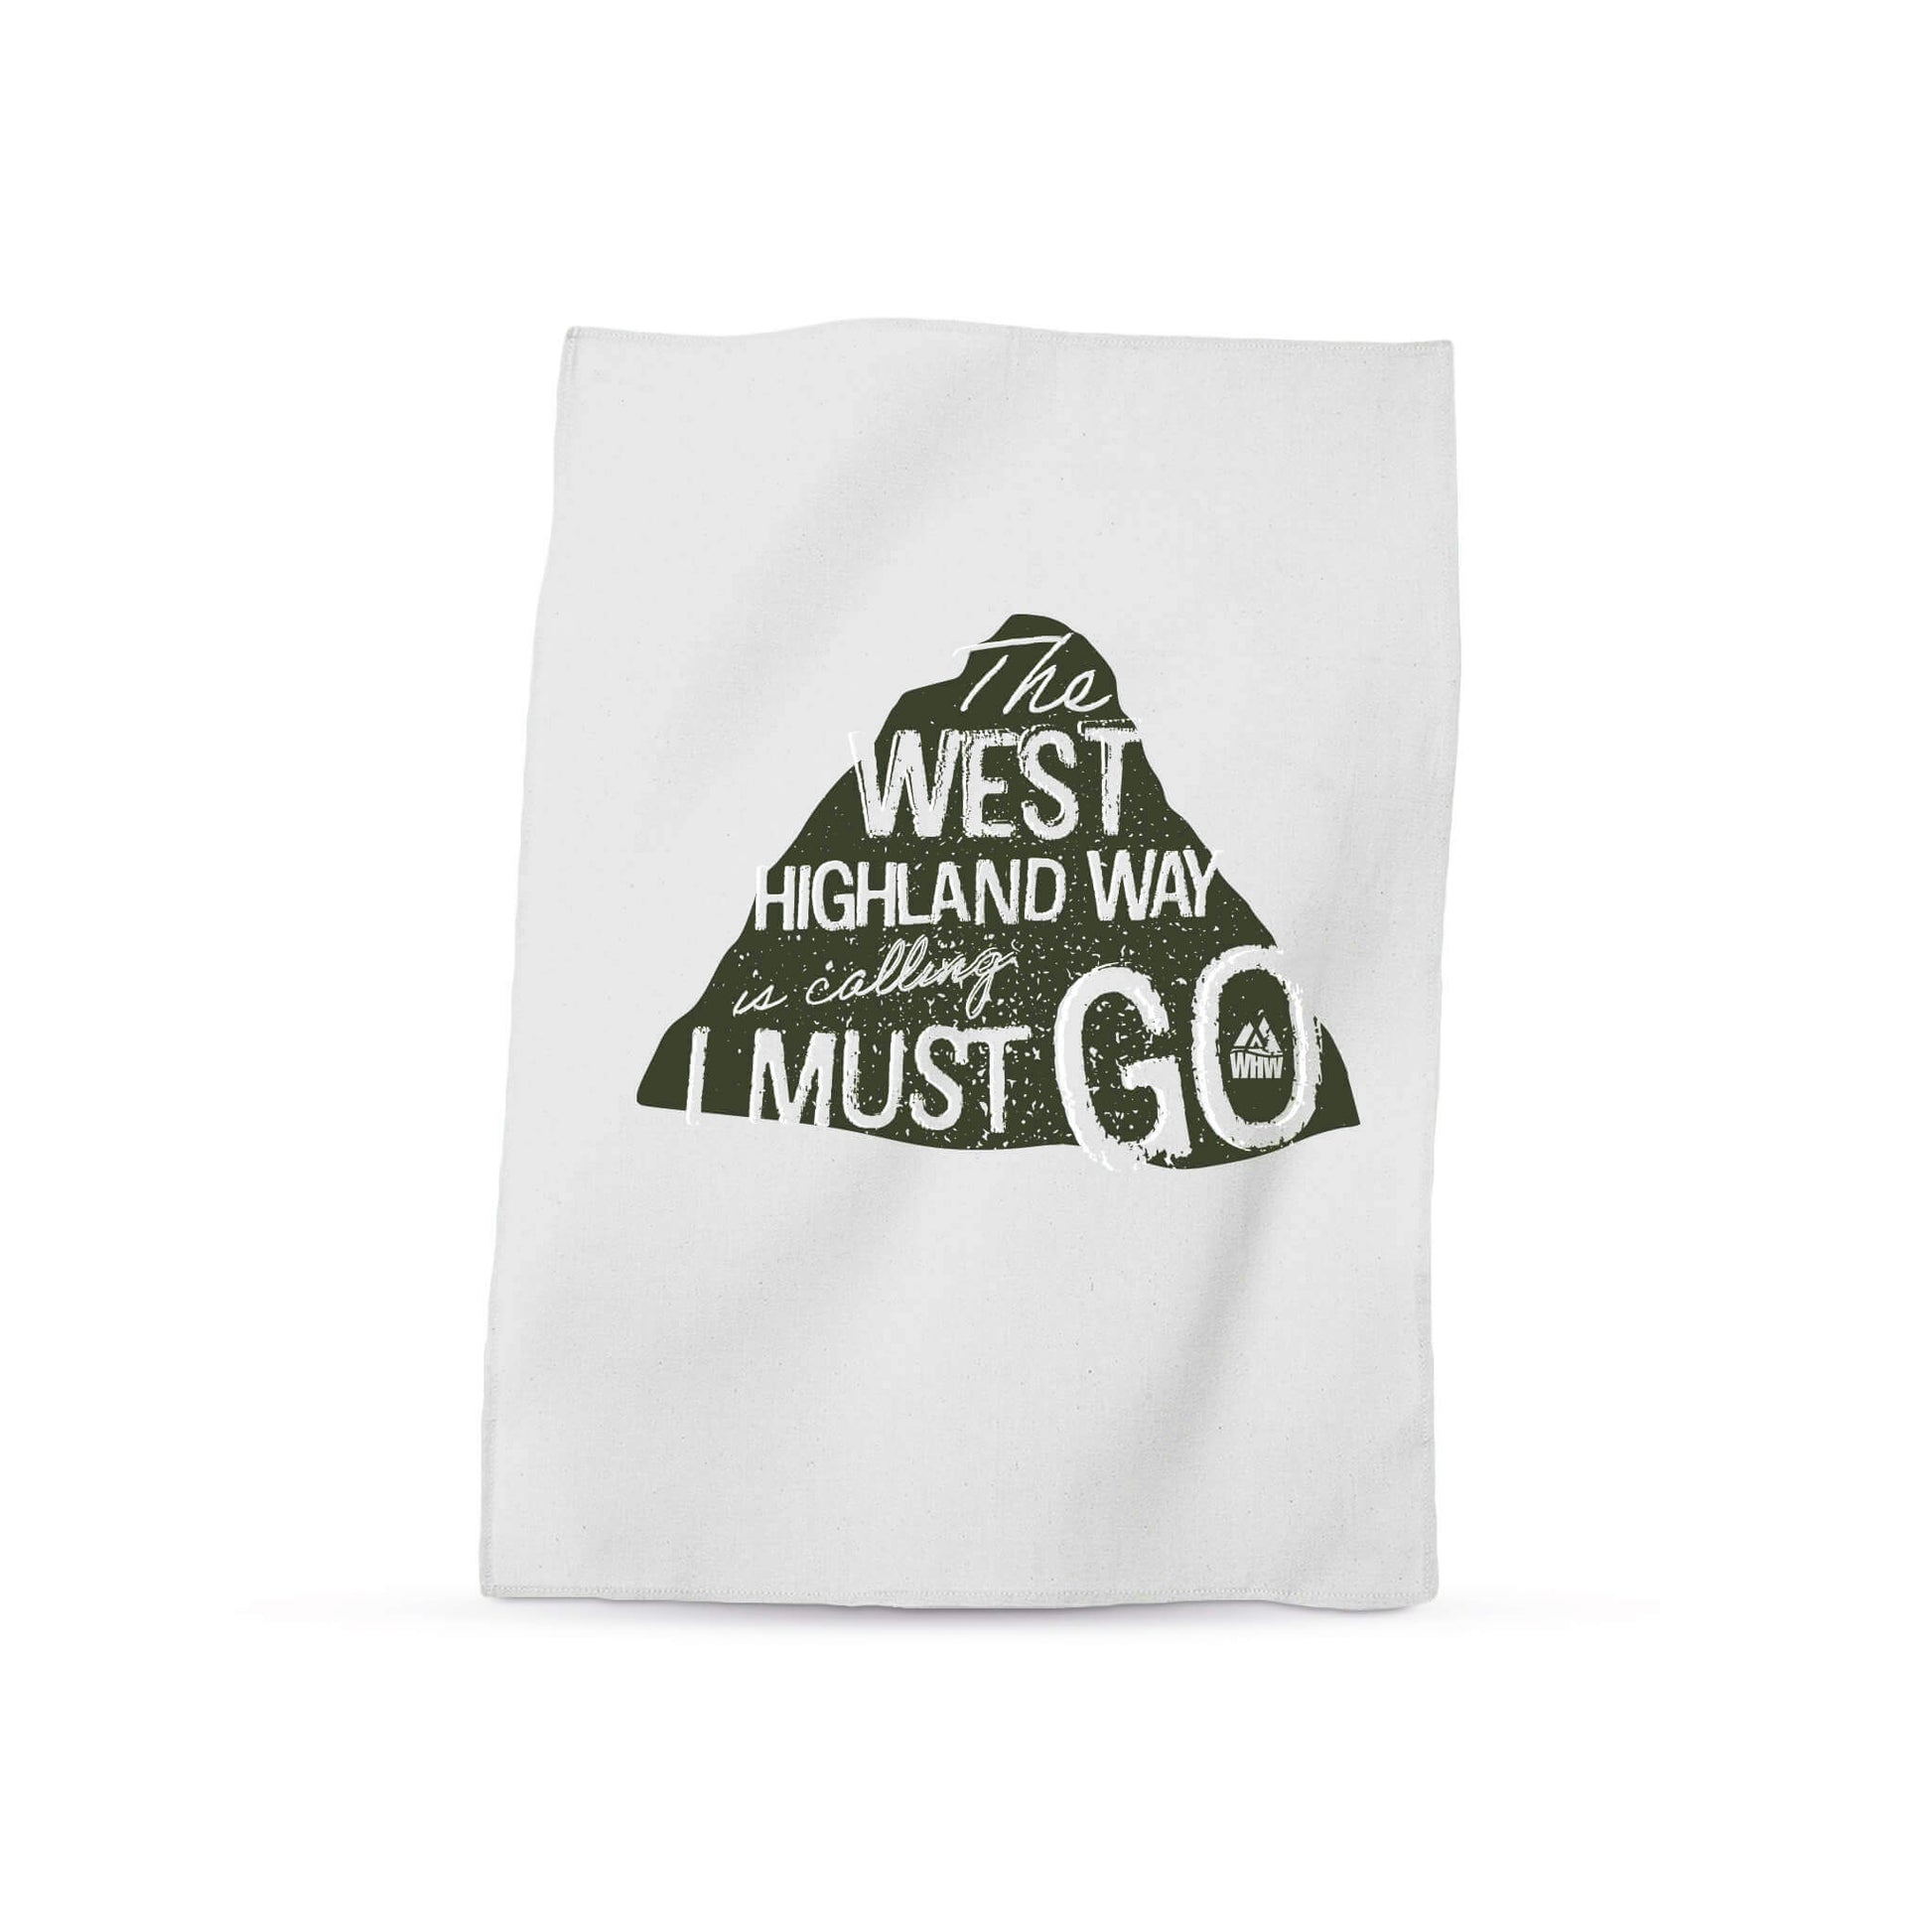 Luxurious white cotton tea towel with The West Highland Way is calling graphic